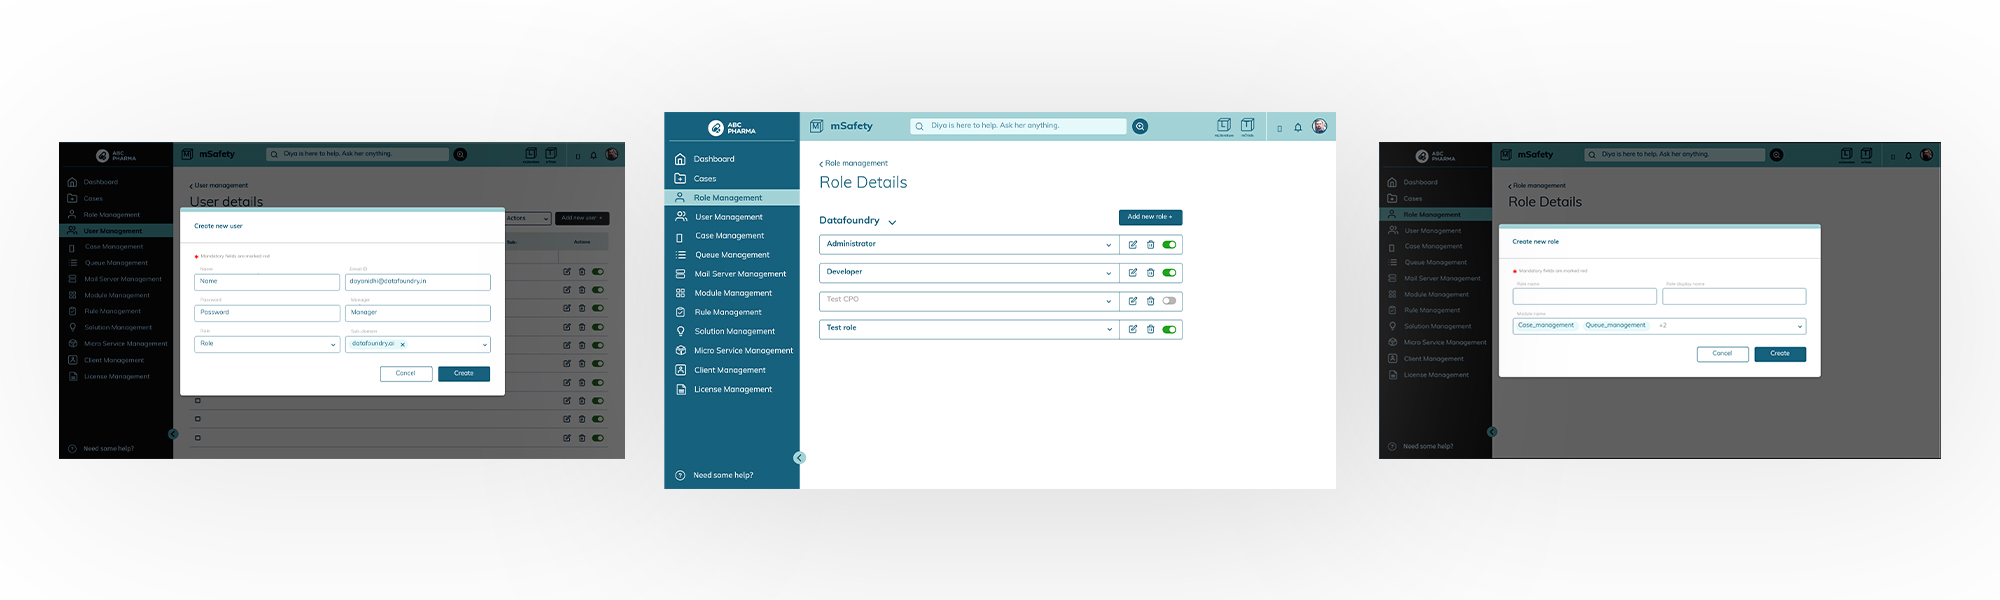 03 msafety by datafoundry client admin screens